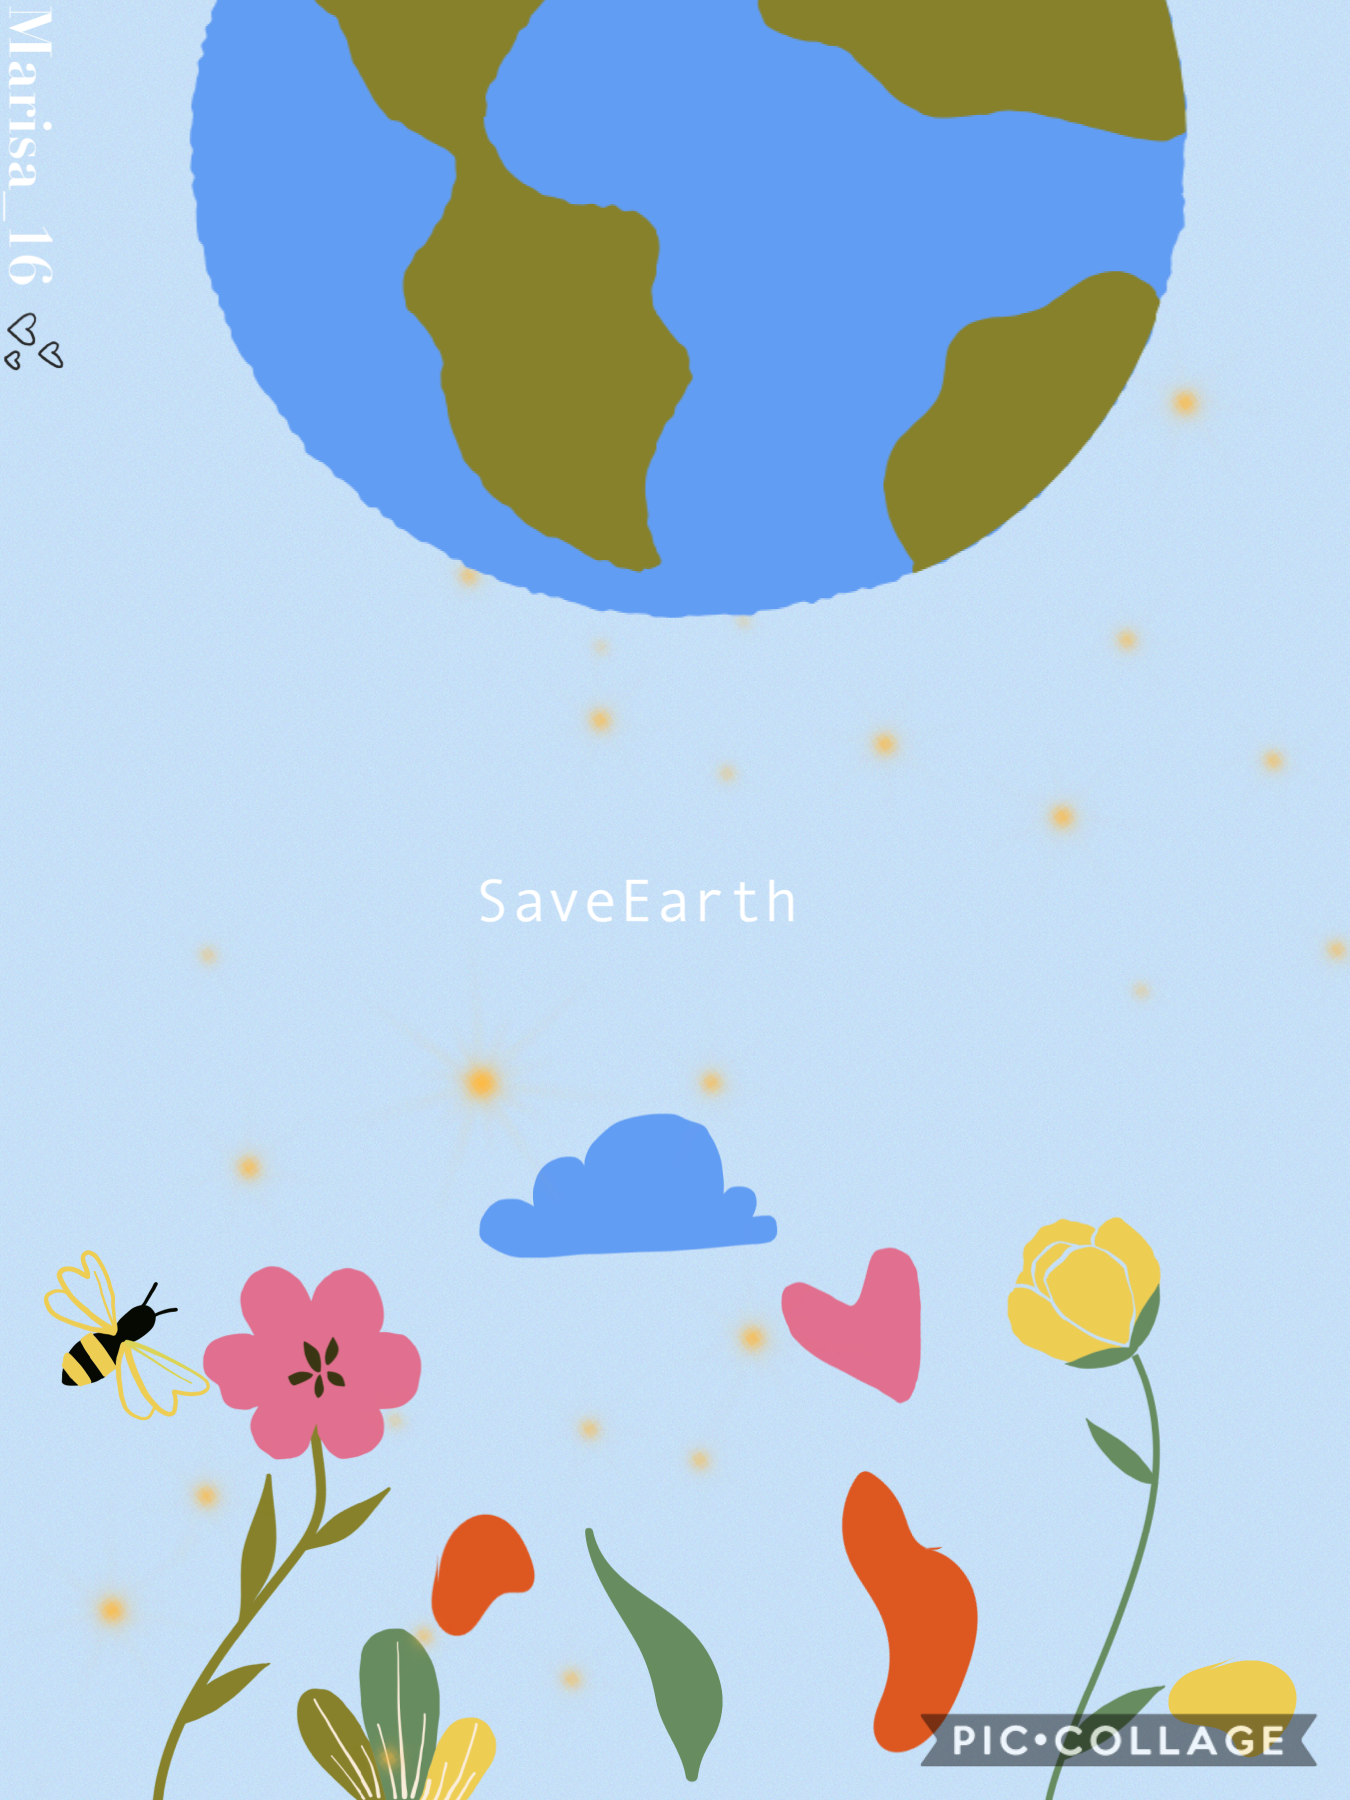 🌎Tap🌳
I’m trying to post more, sorry! 
Just a quick one. Hope you like!
Earth is so important, we need to preserve it.